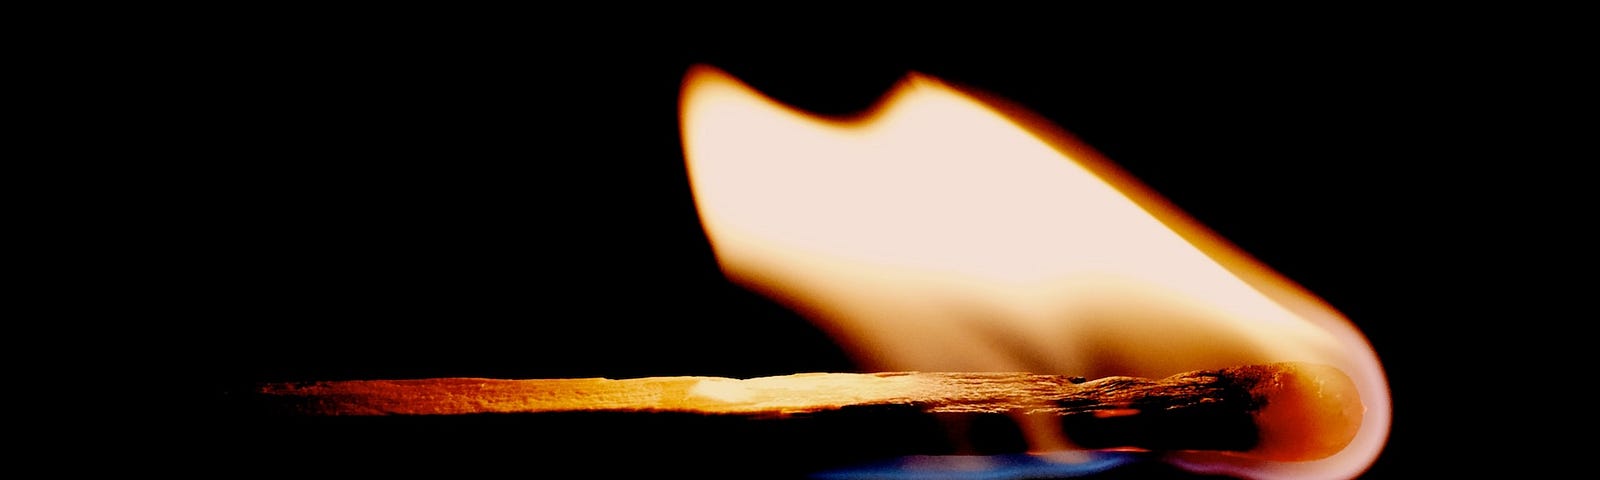 A lit match with a flickering flame extending out of the darkness